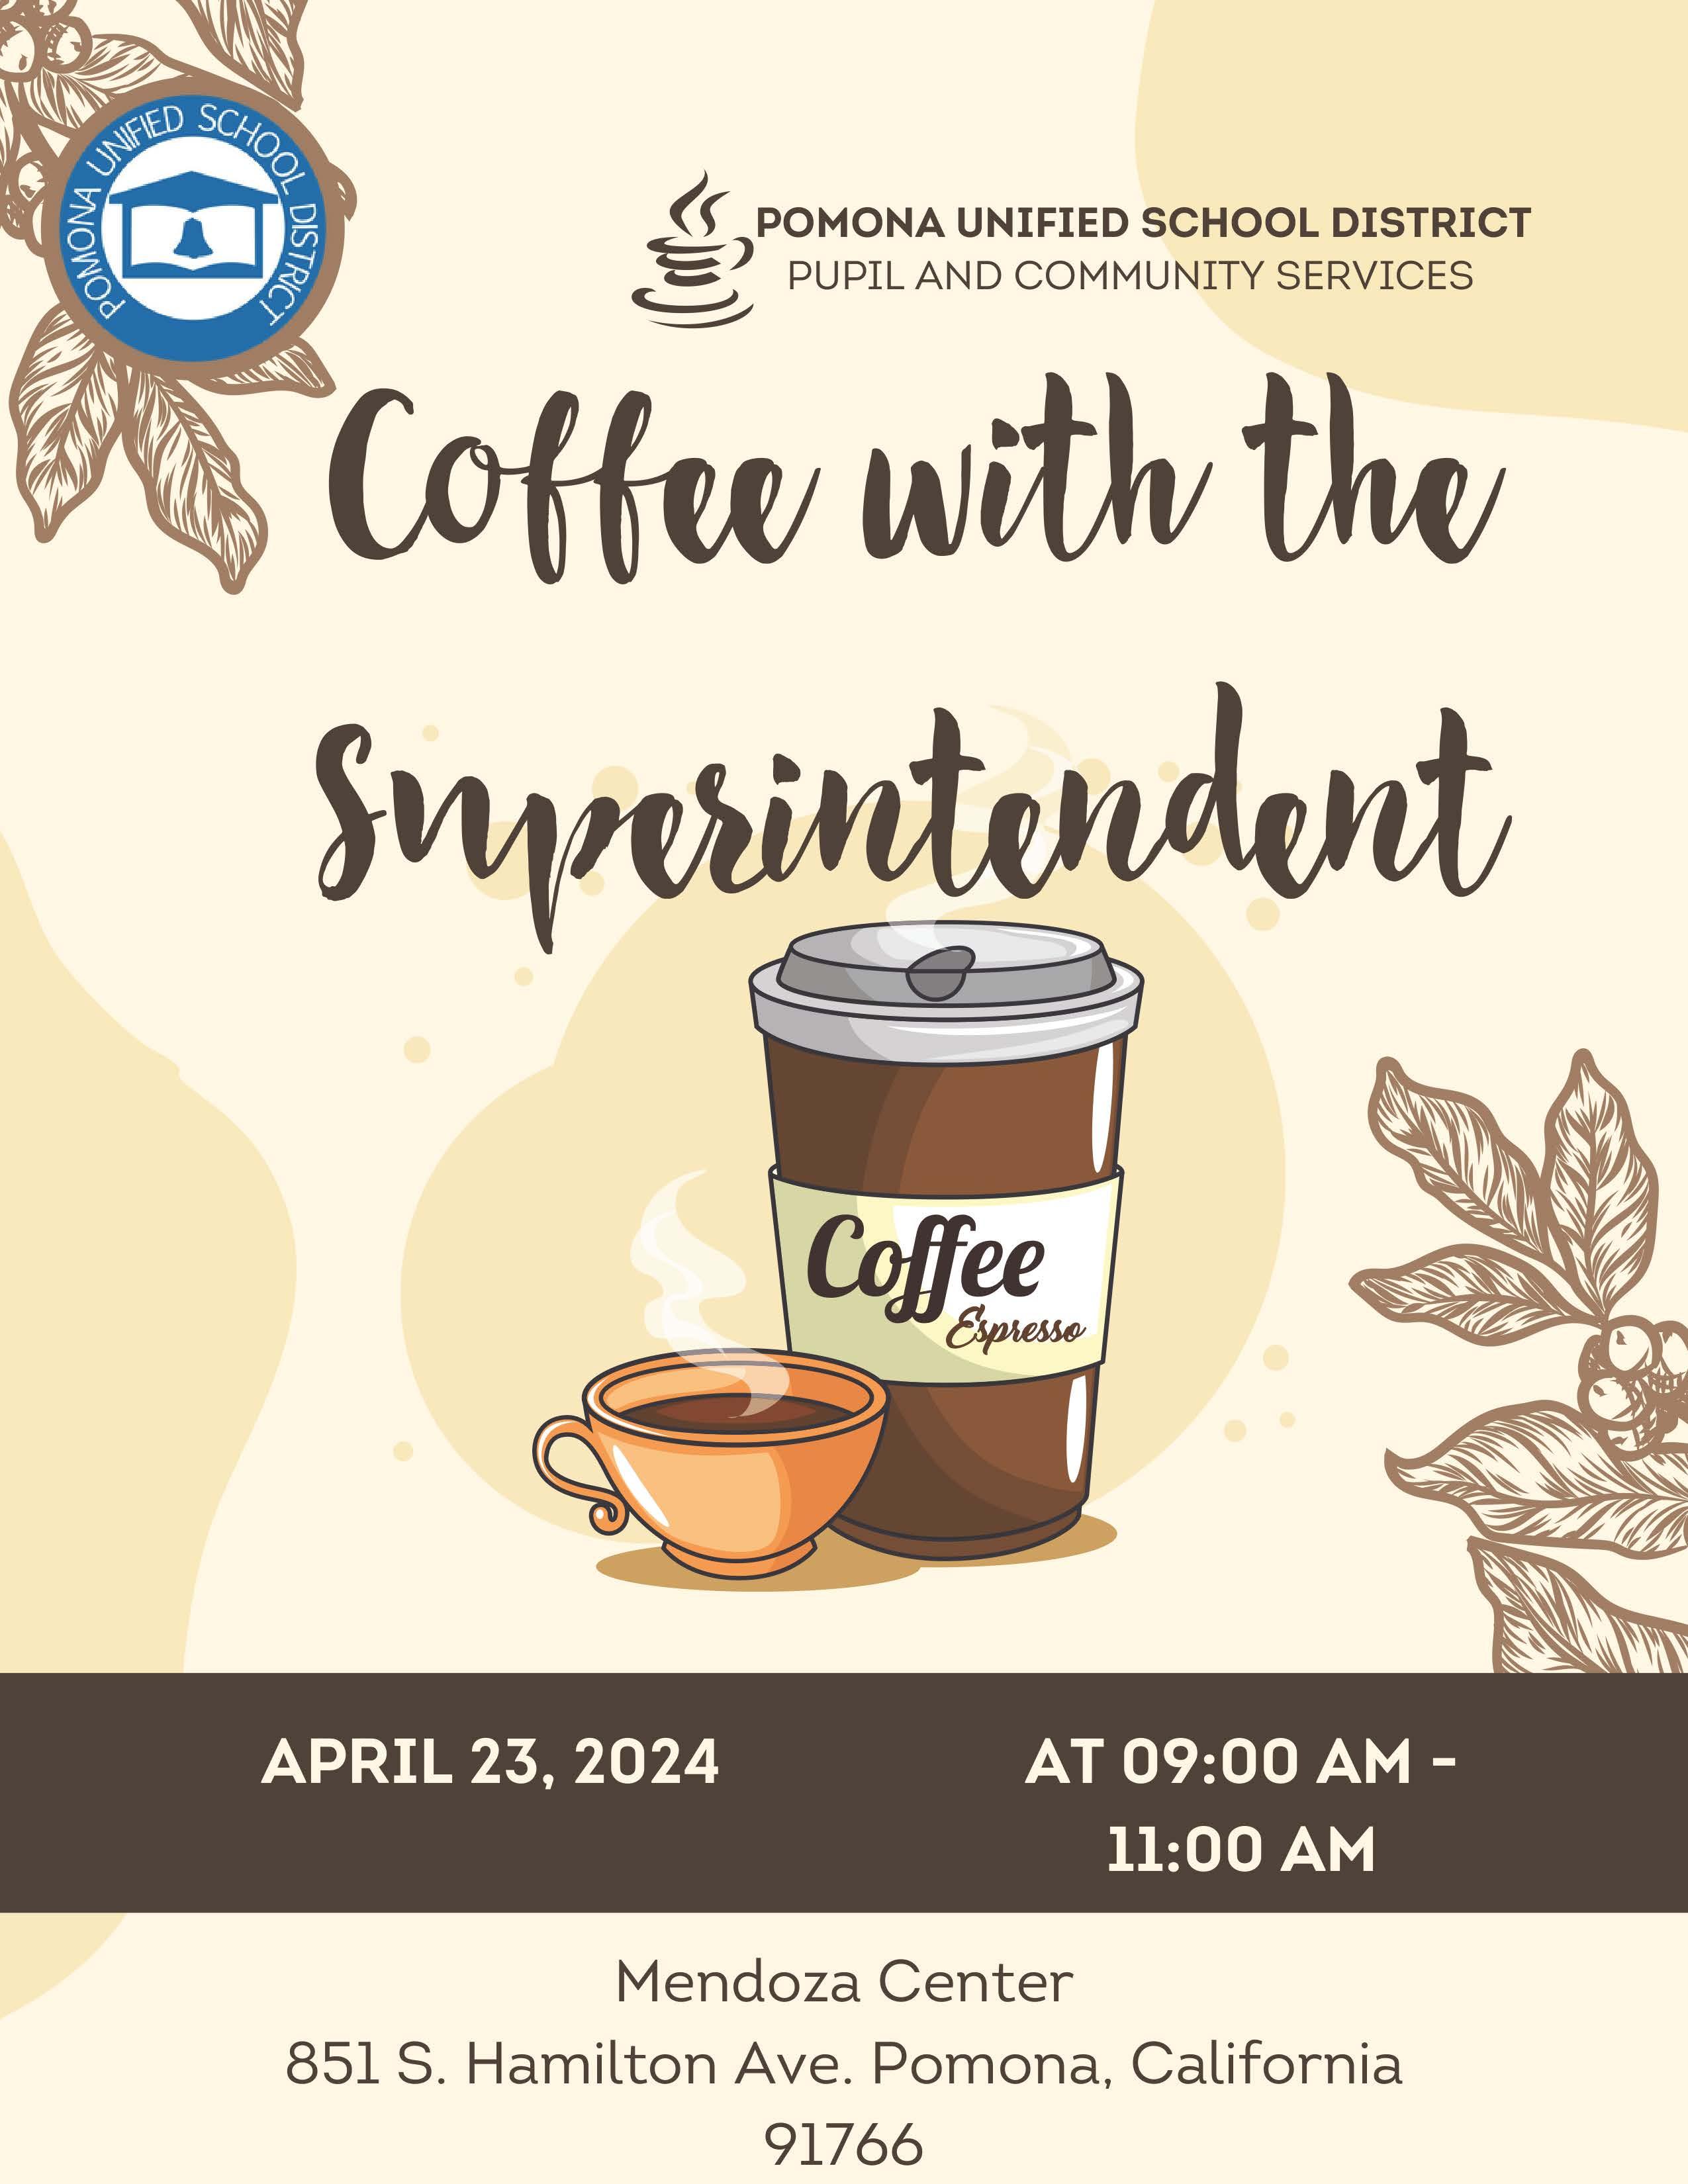 Coffee with the Supt - image for web scheduled for 4.23.24